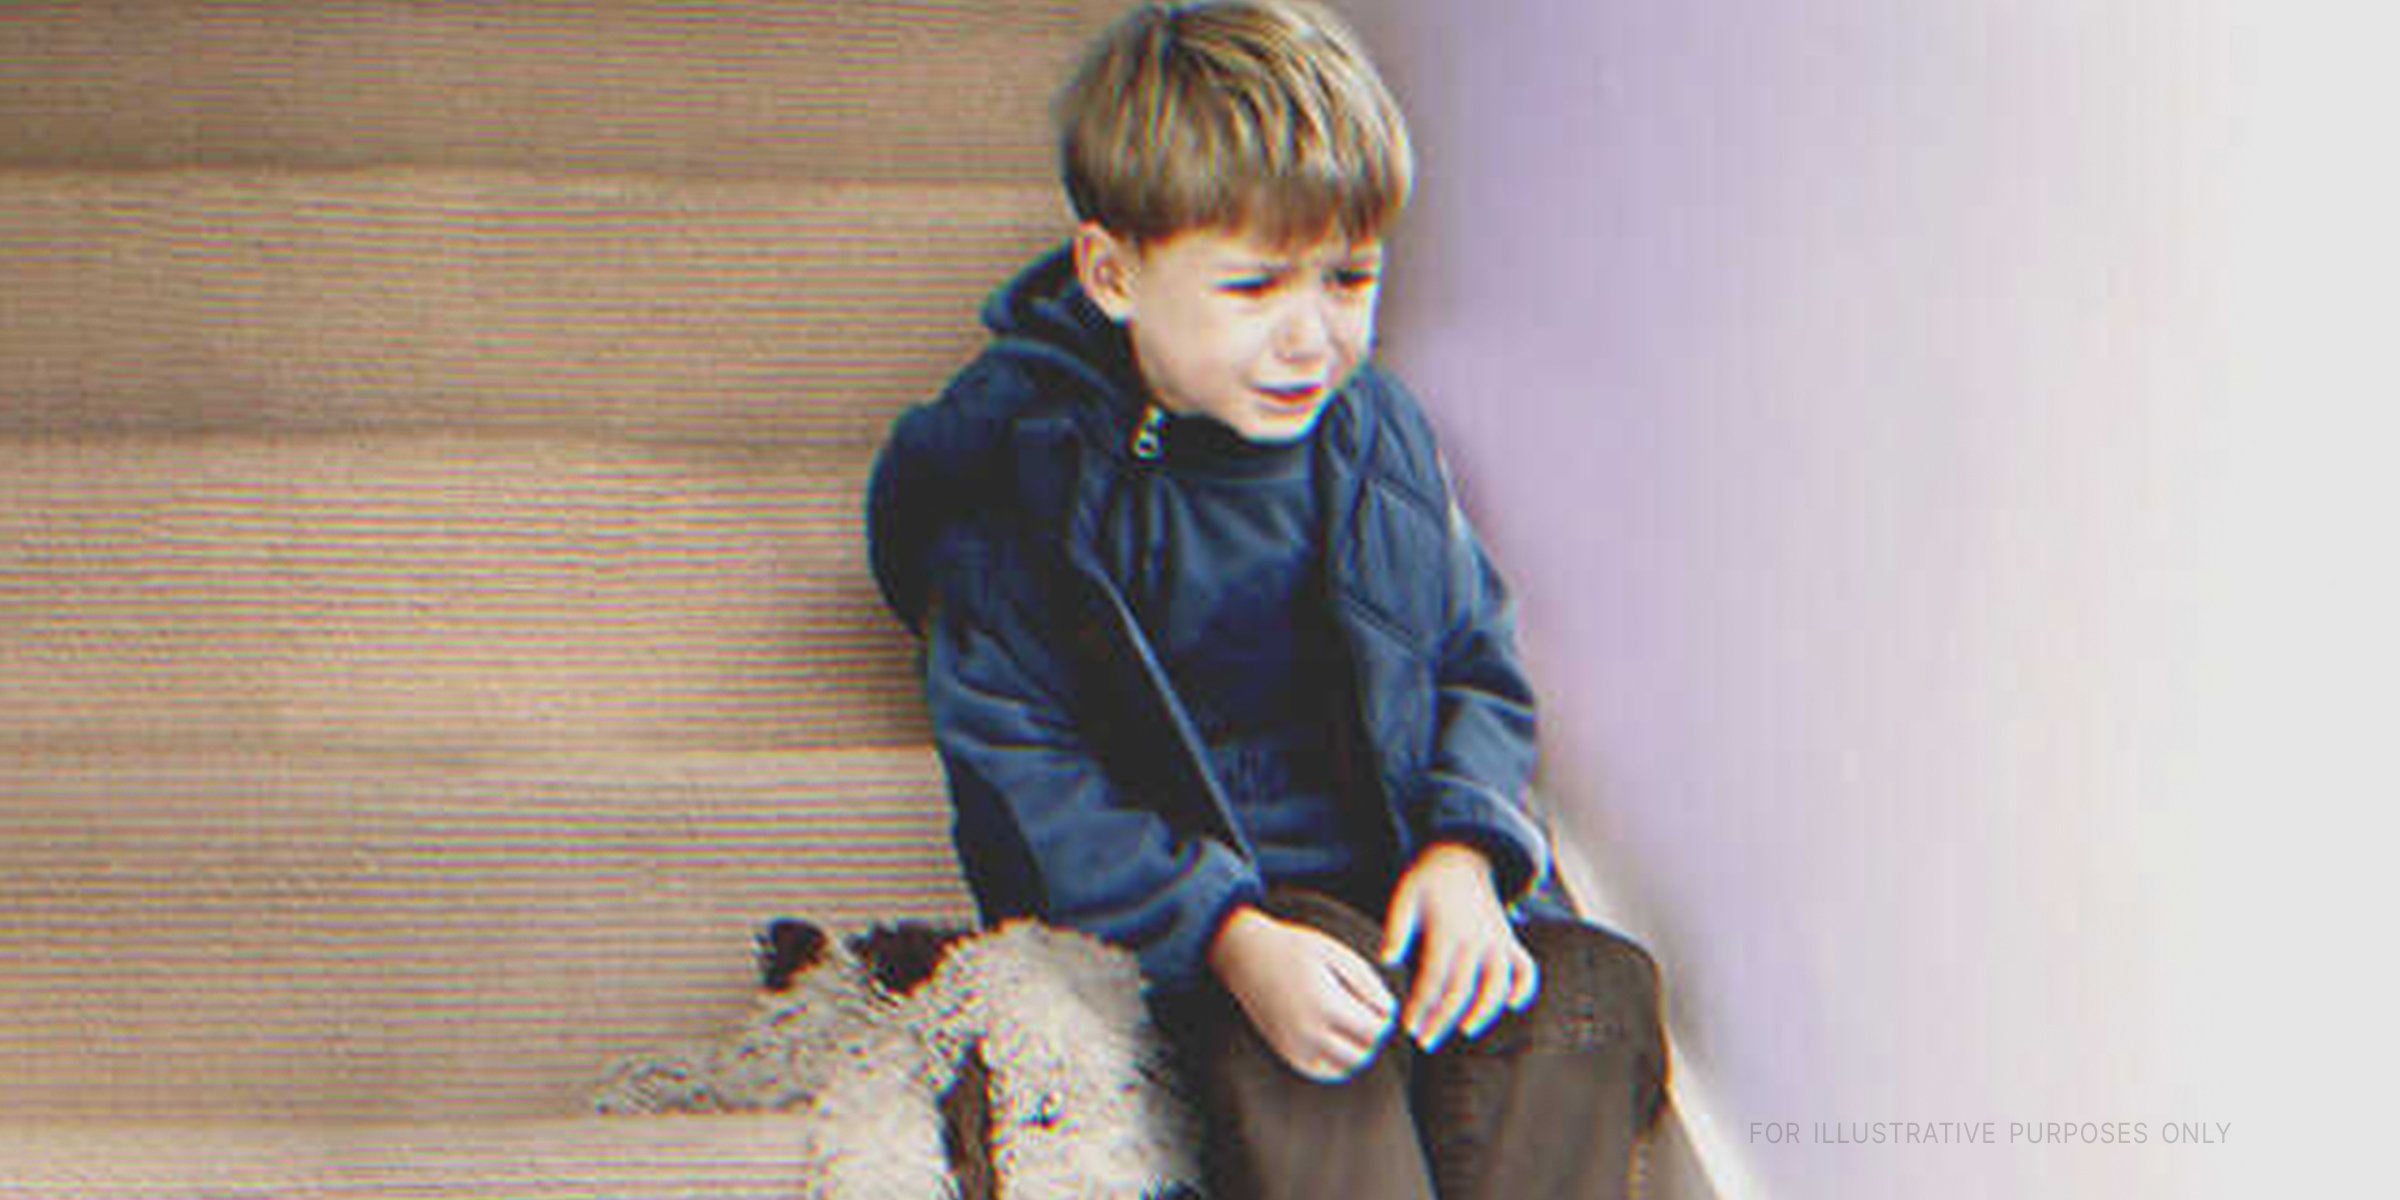 Little Boy Crying On The Stairs | Source: Shutterstock